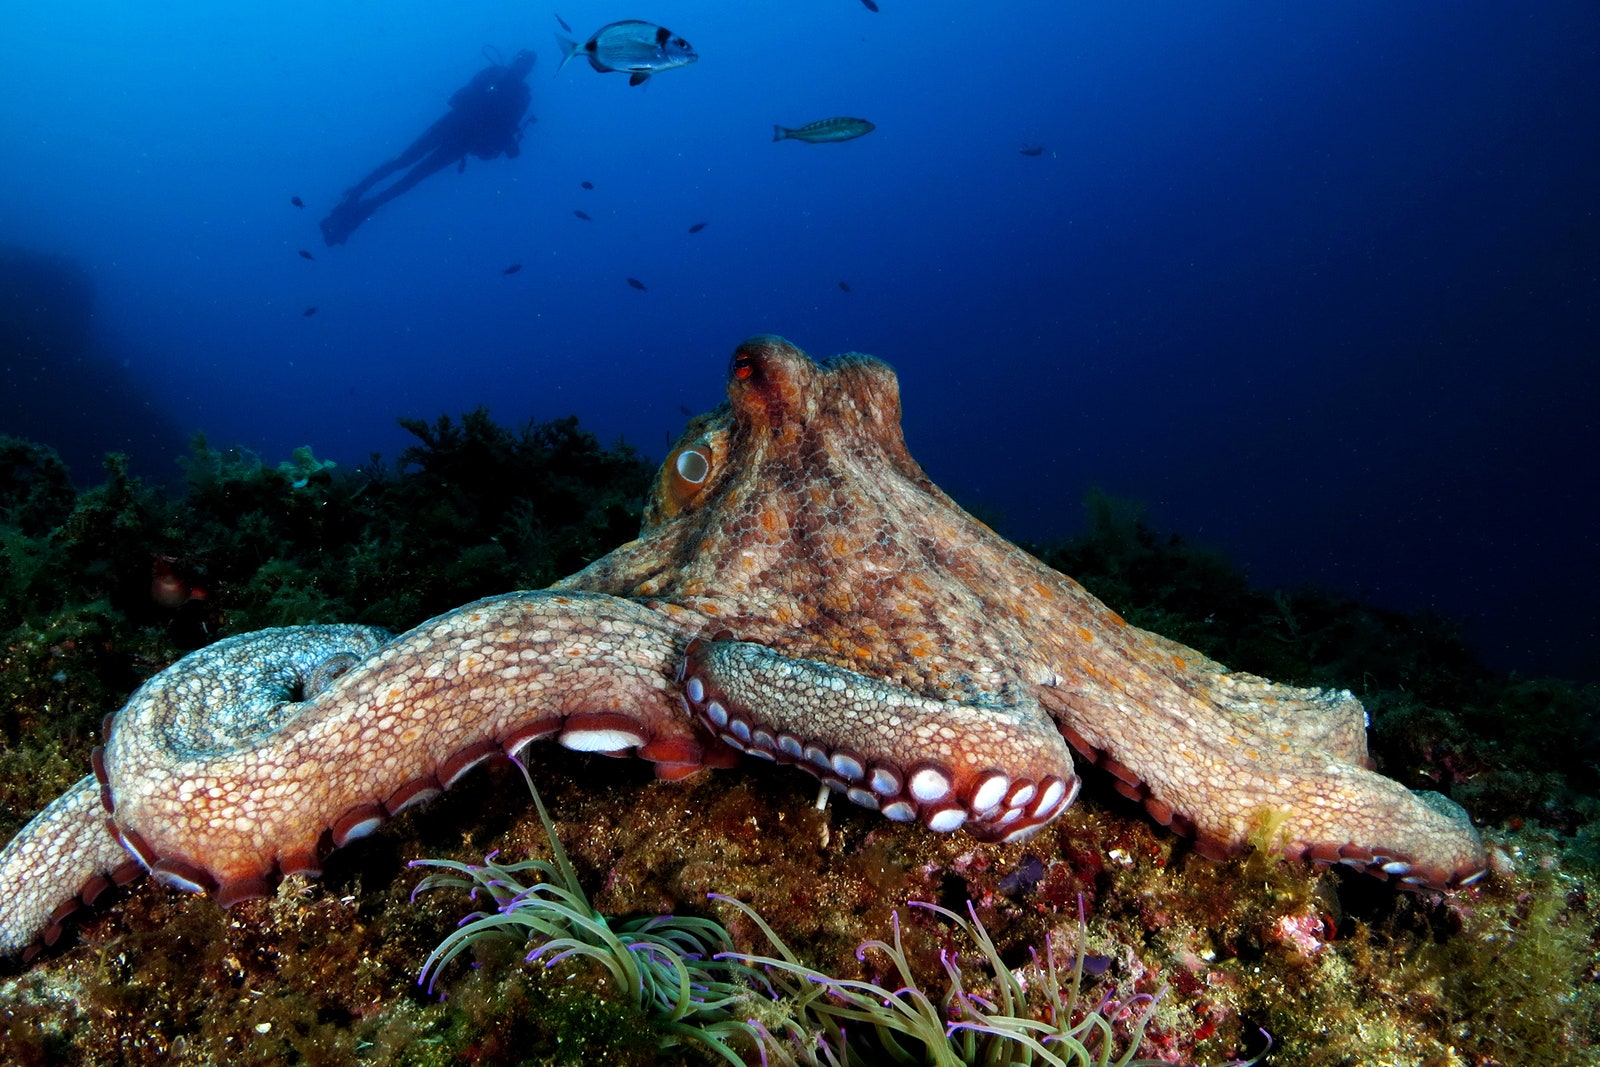 What Do We Owe the Octopus?